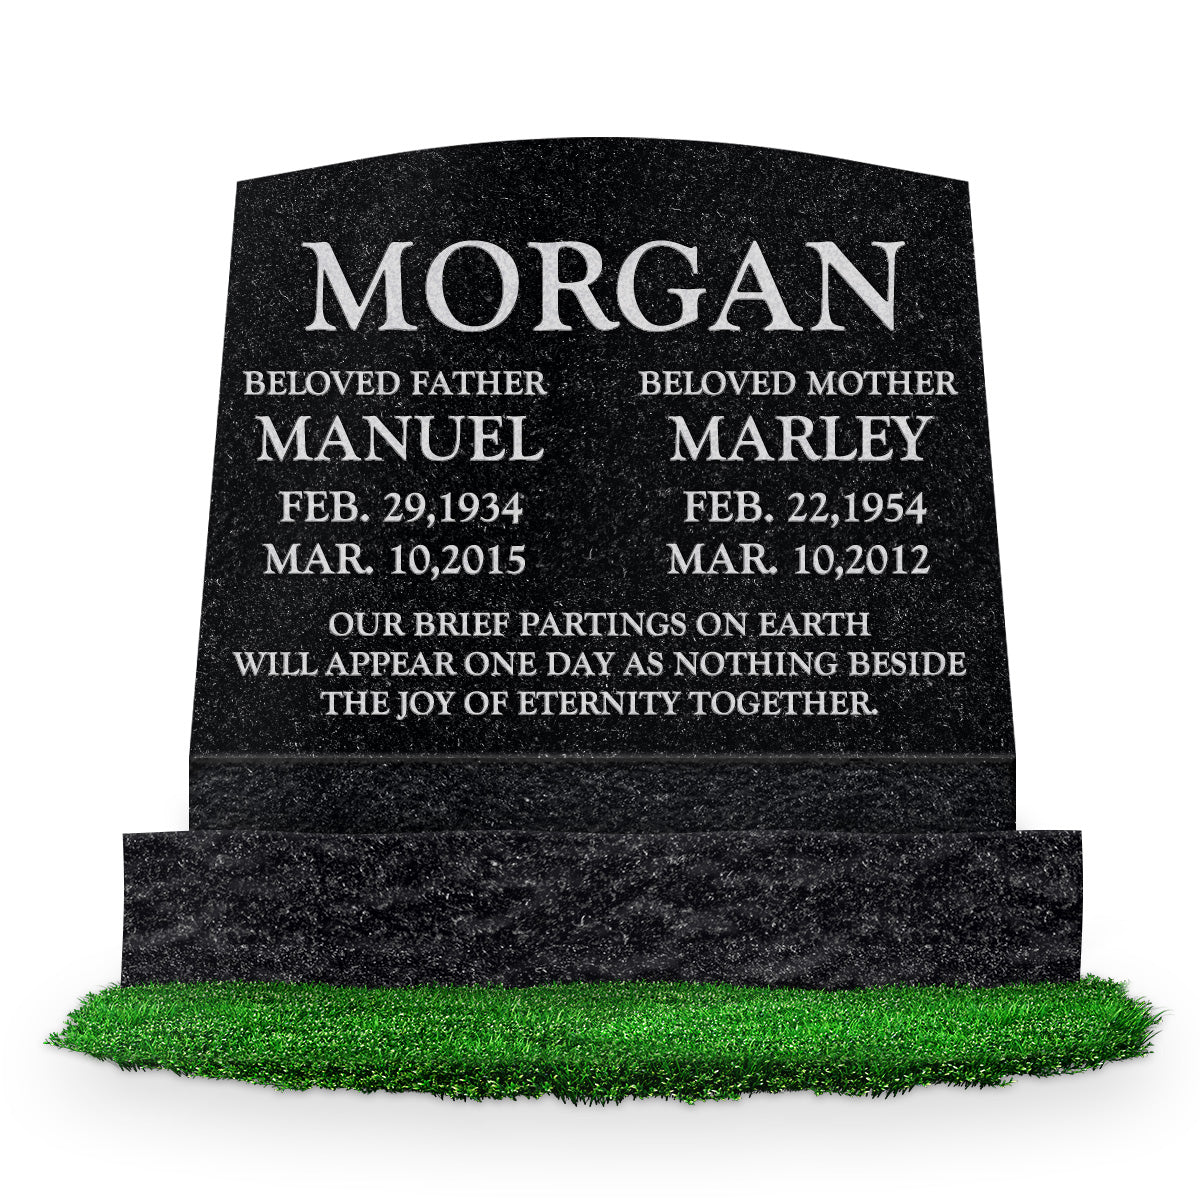 20″ x 10″ x 16″ Serp Top Slant Headstone: polished front and back; 24″ base; Companion/Text